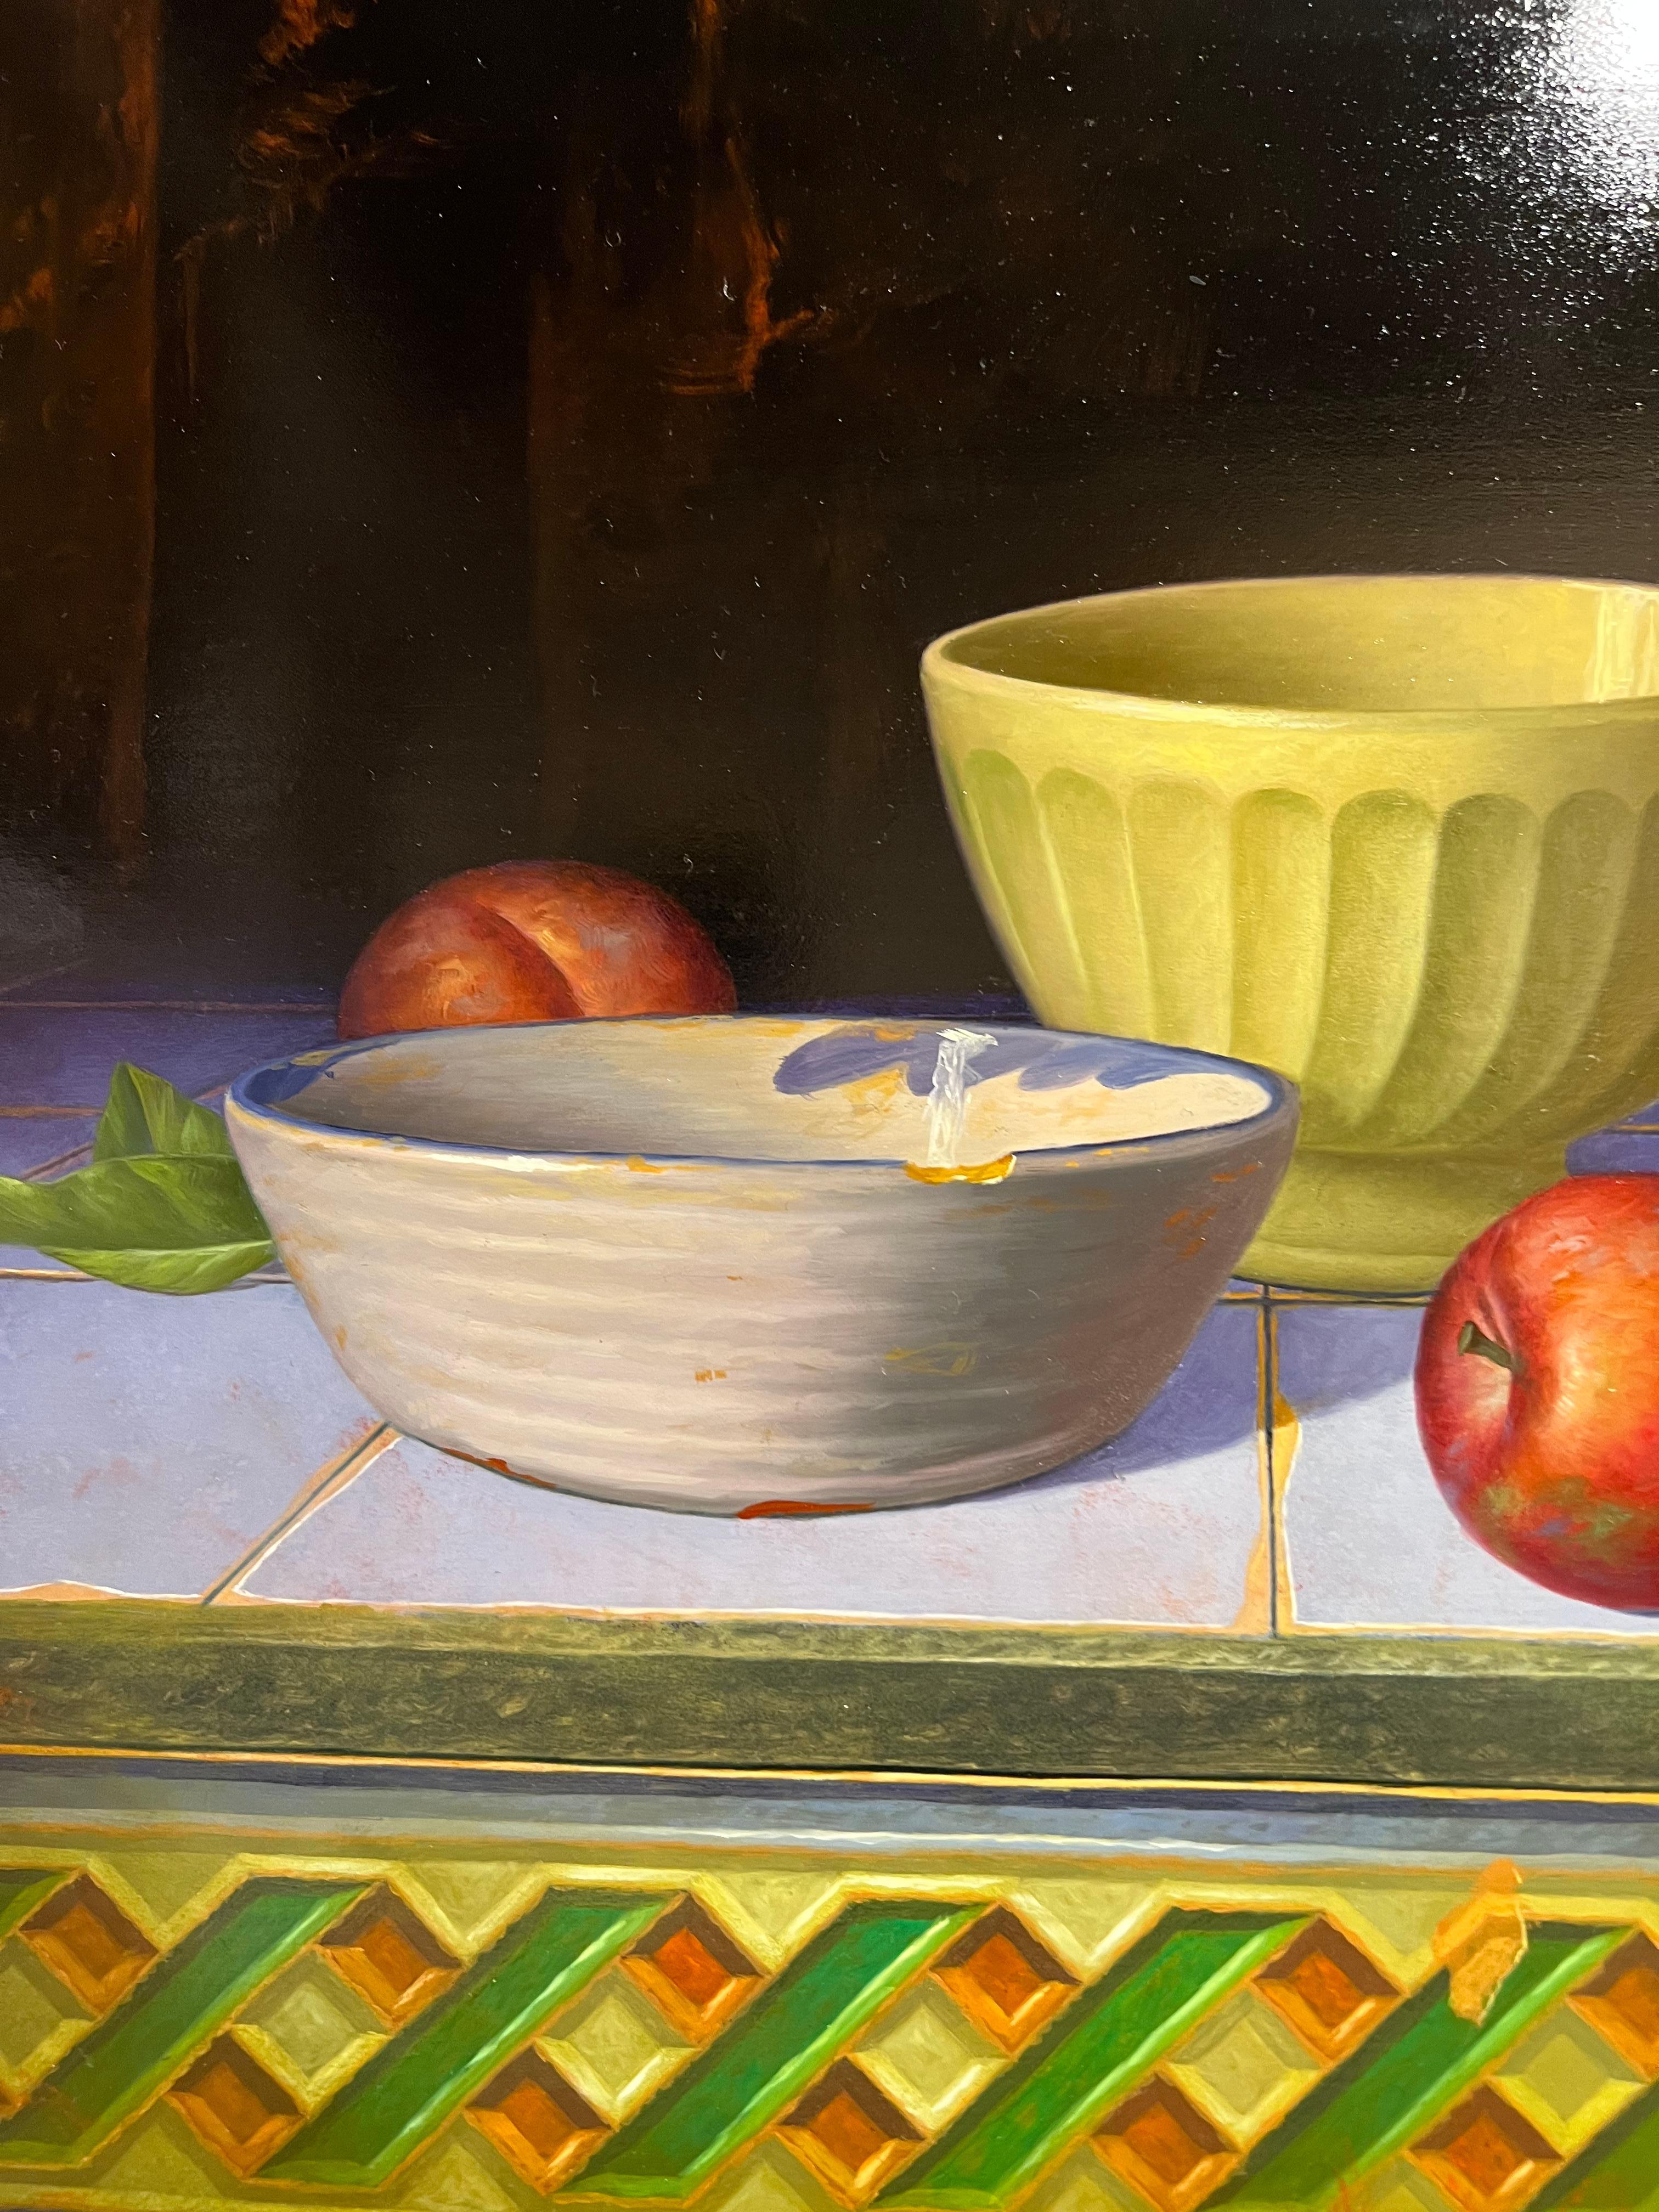 Still Life Bowls and Plums - Painting by Leon Olmo